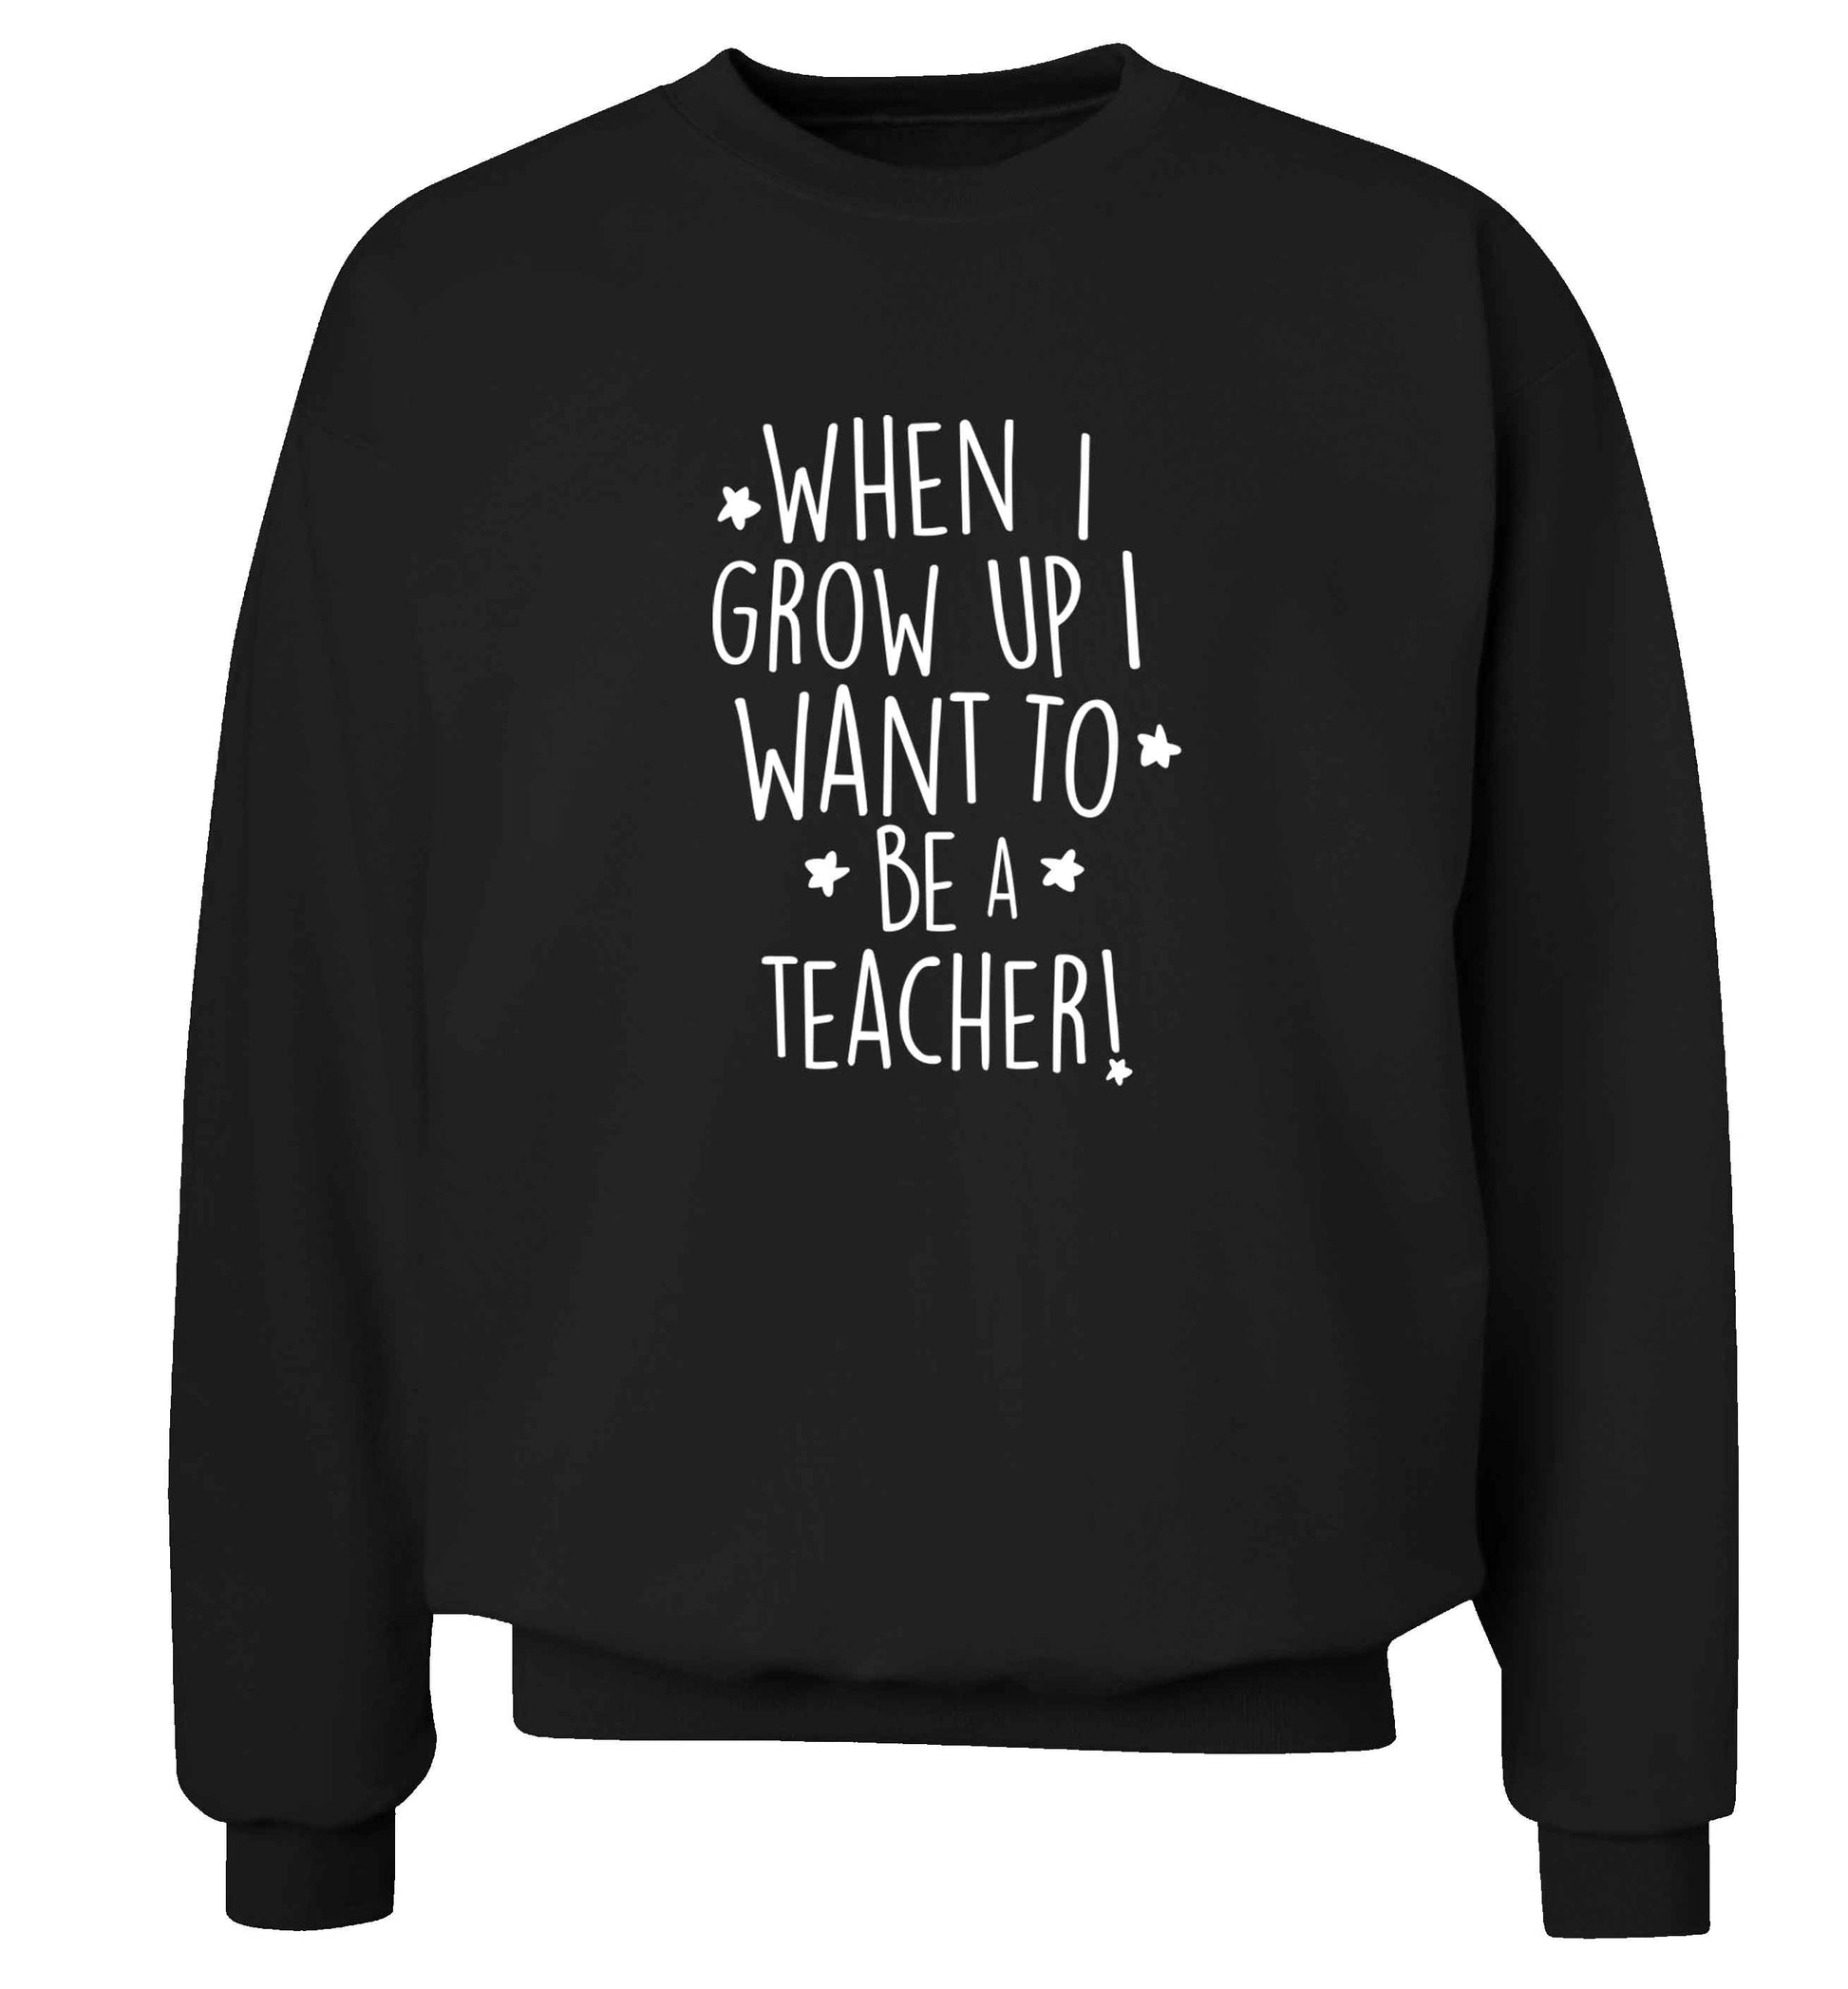 When I grow up I want to be a teacher adult's unisex black sweater 2XL